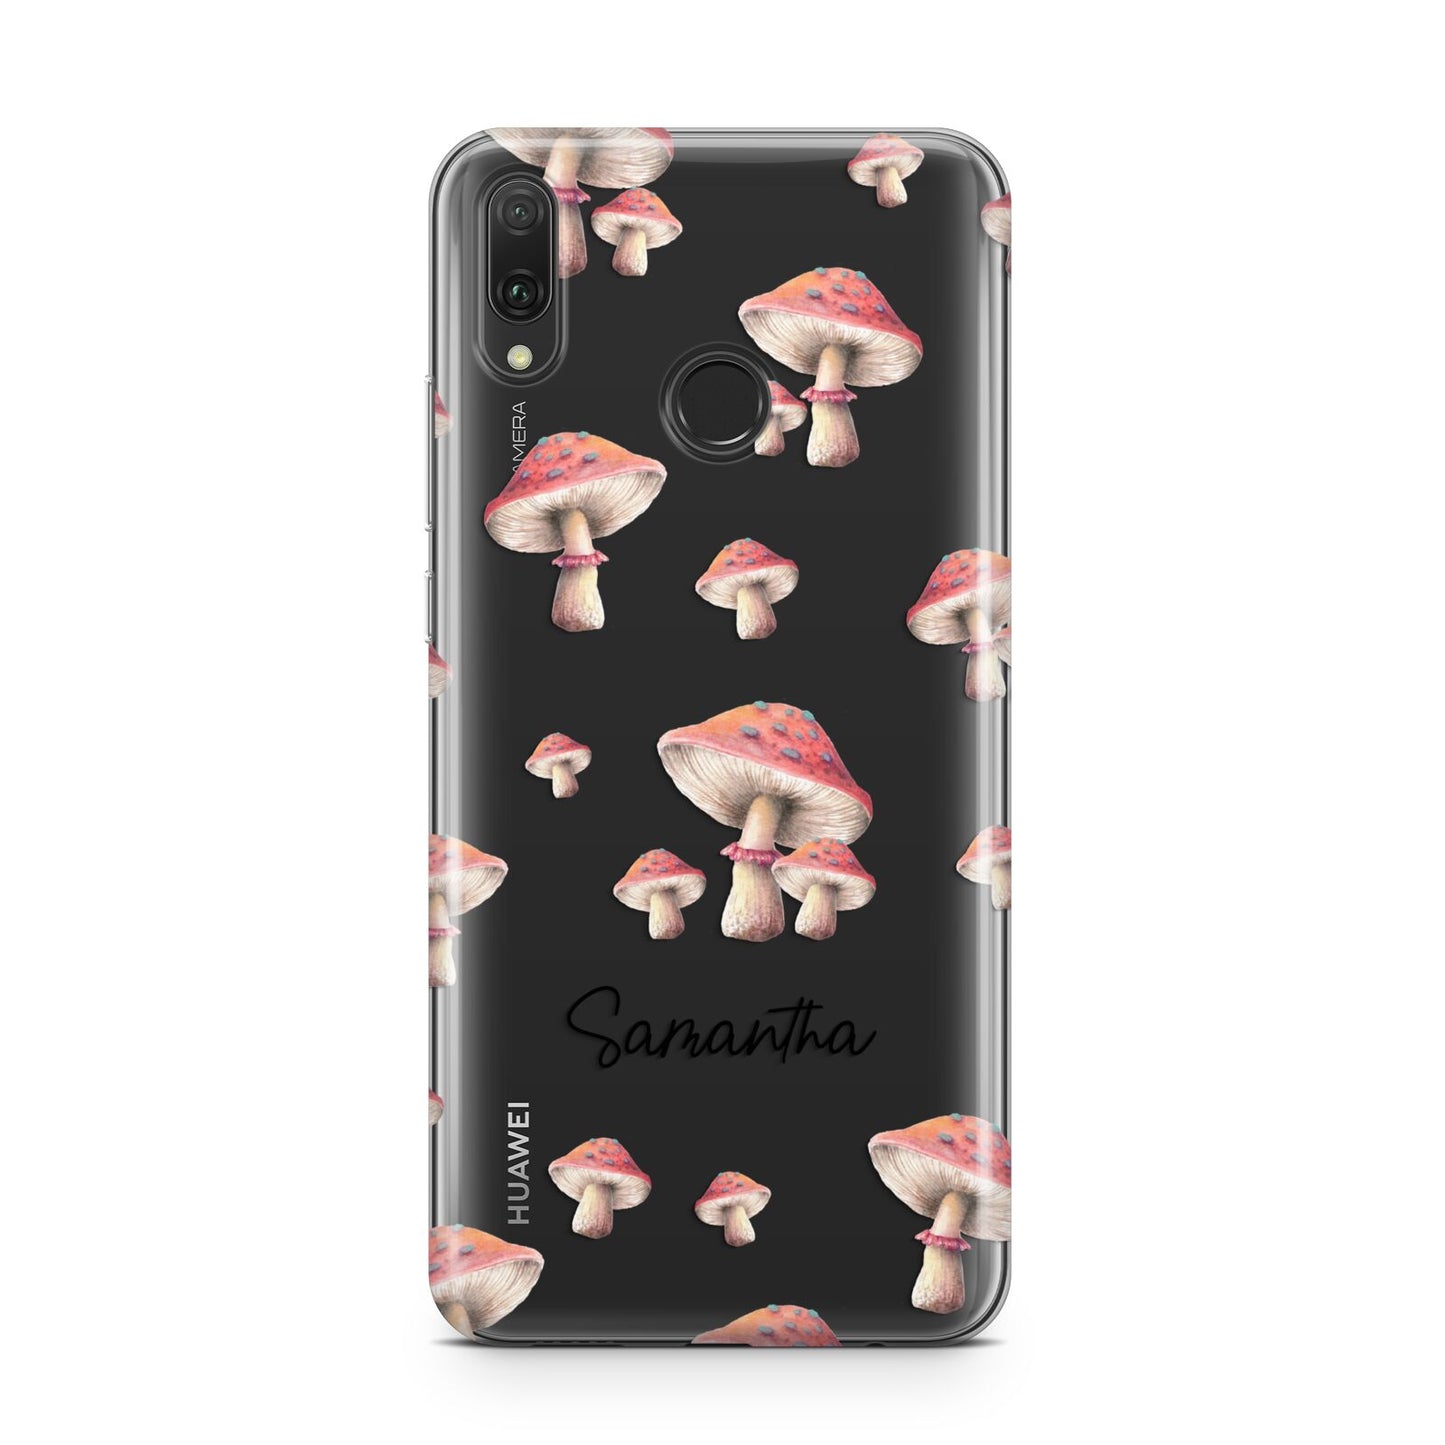 Mushroom Illustrations with Name Huawei Y9 2019